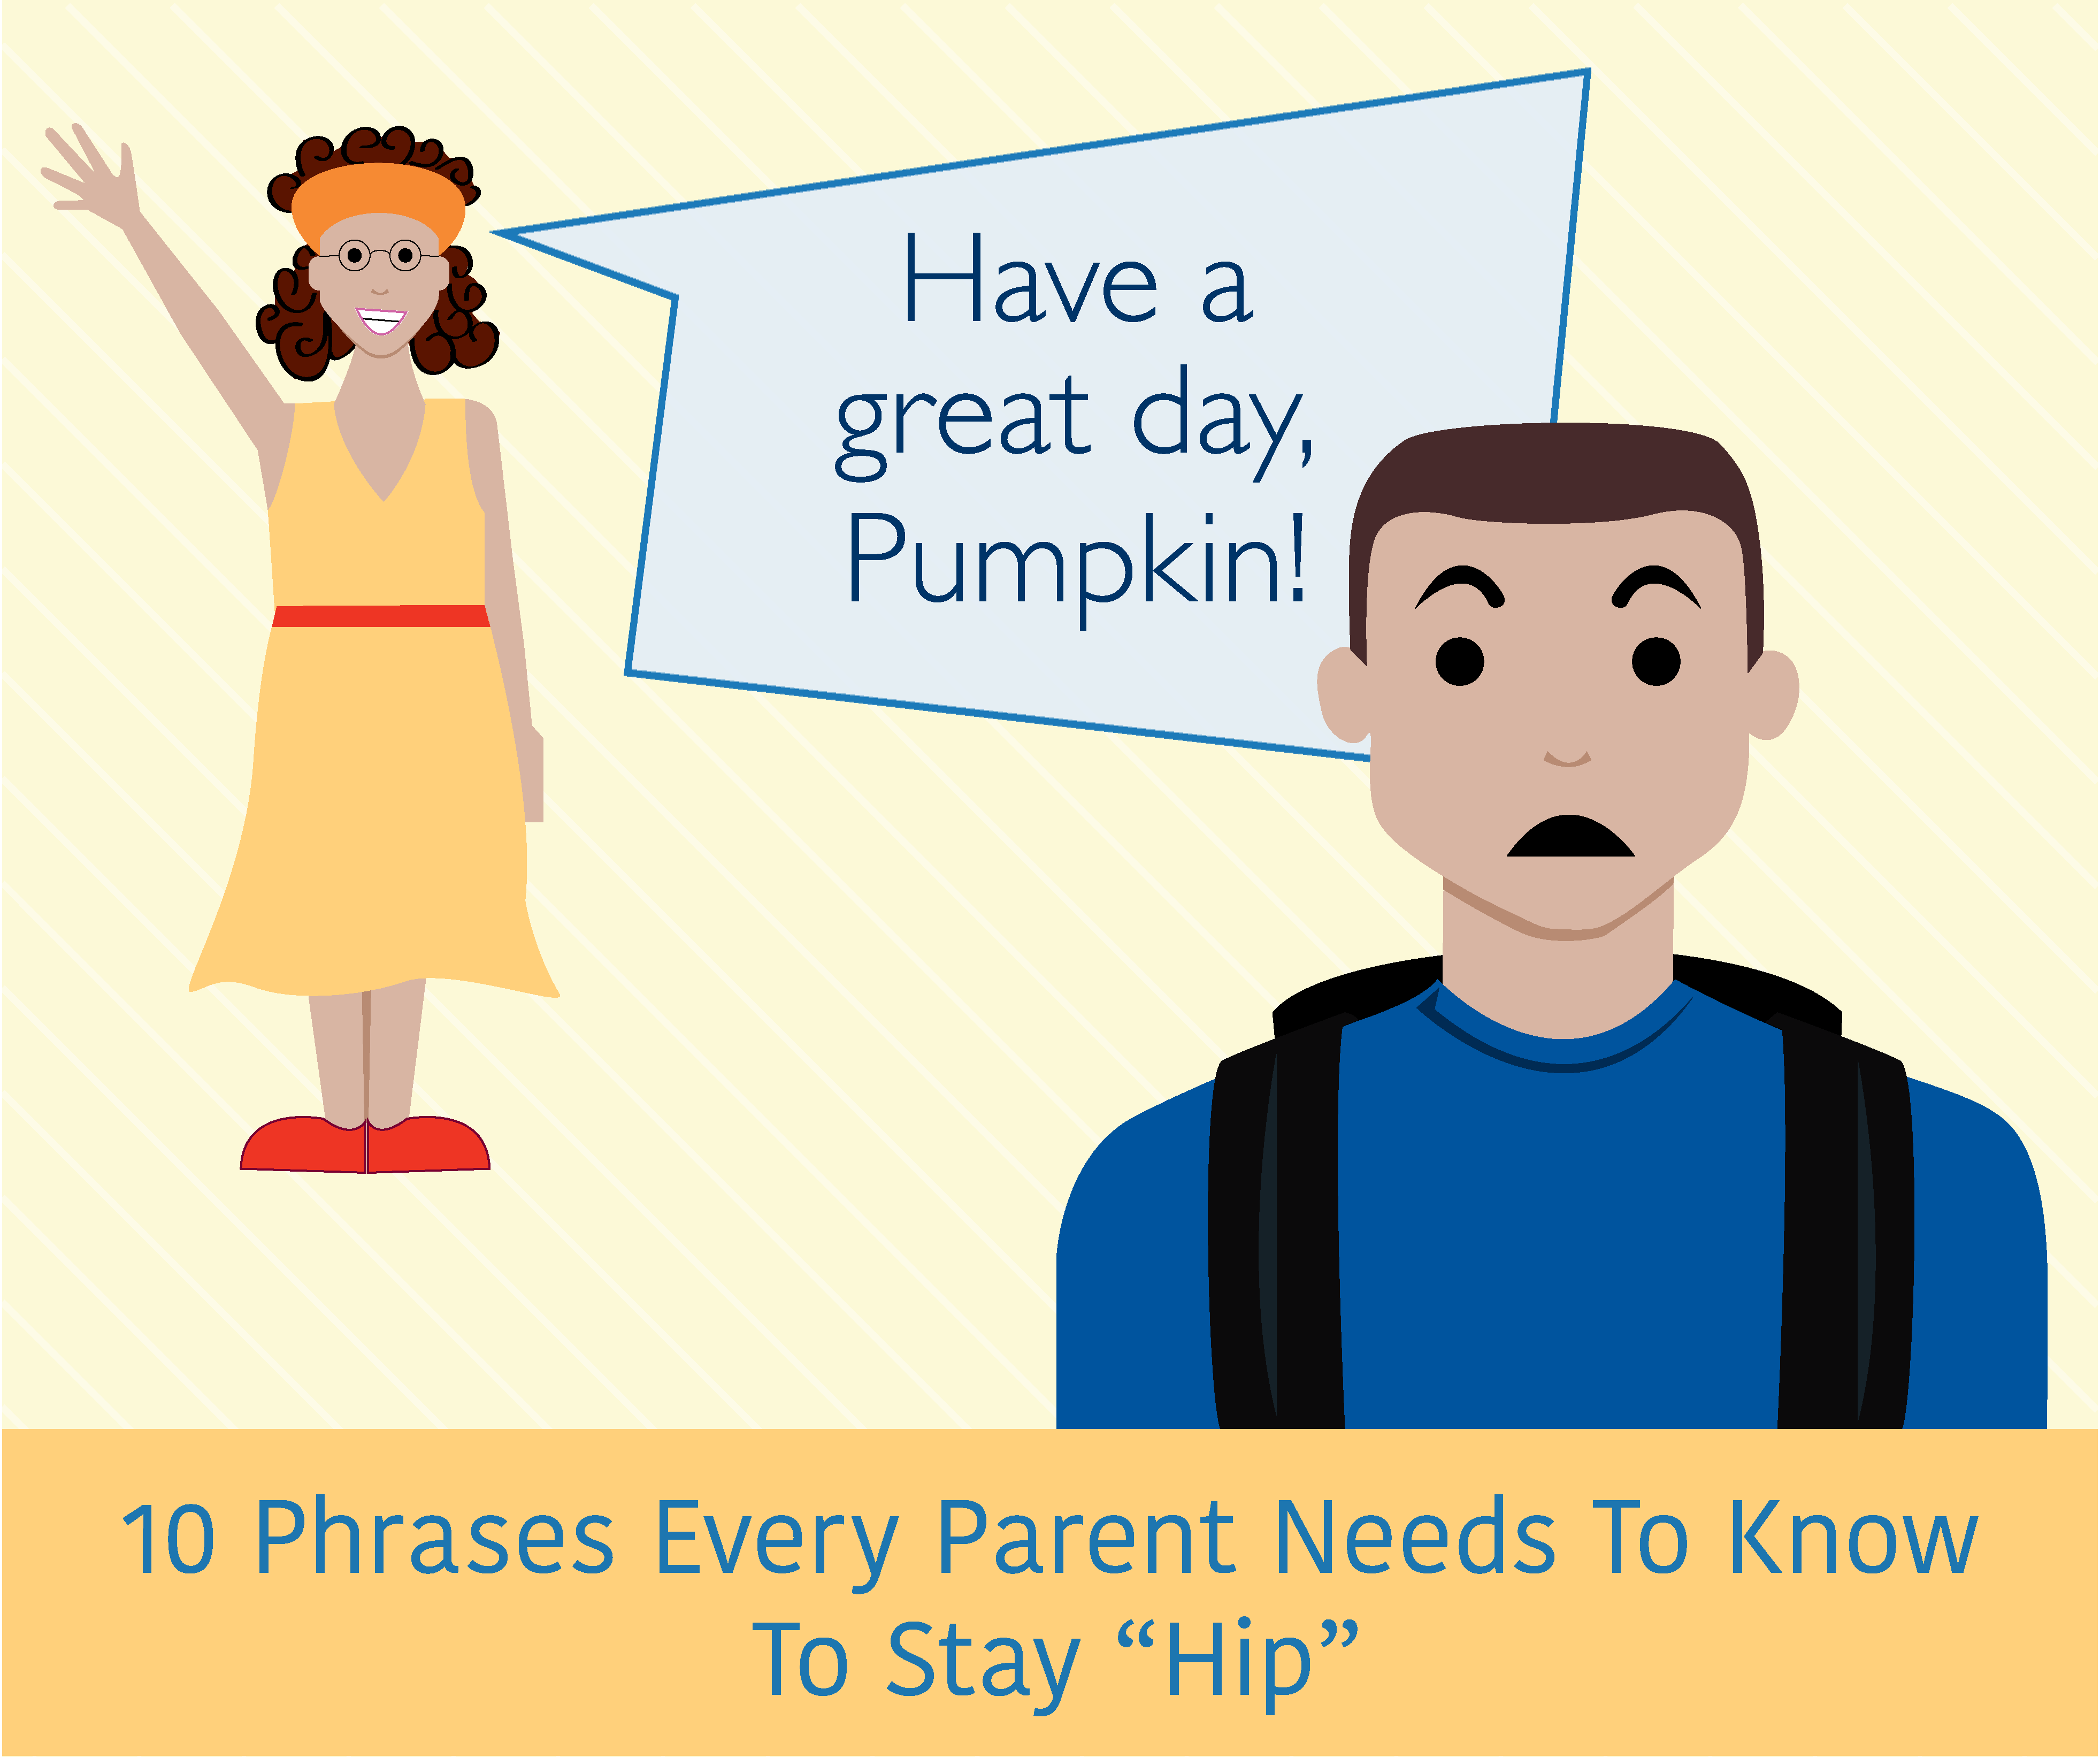 Phrases Every Parent needs to know to Stay "hip"